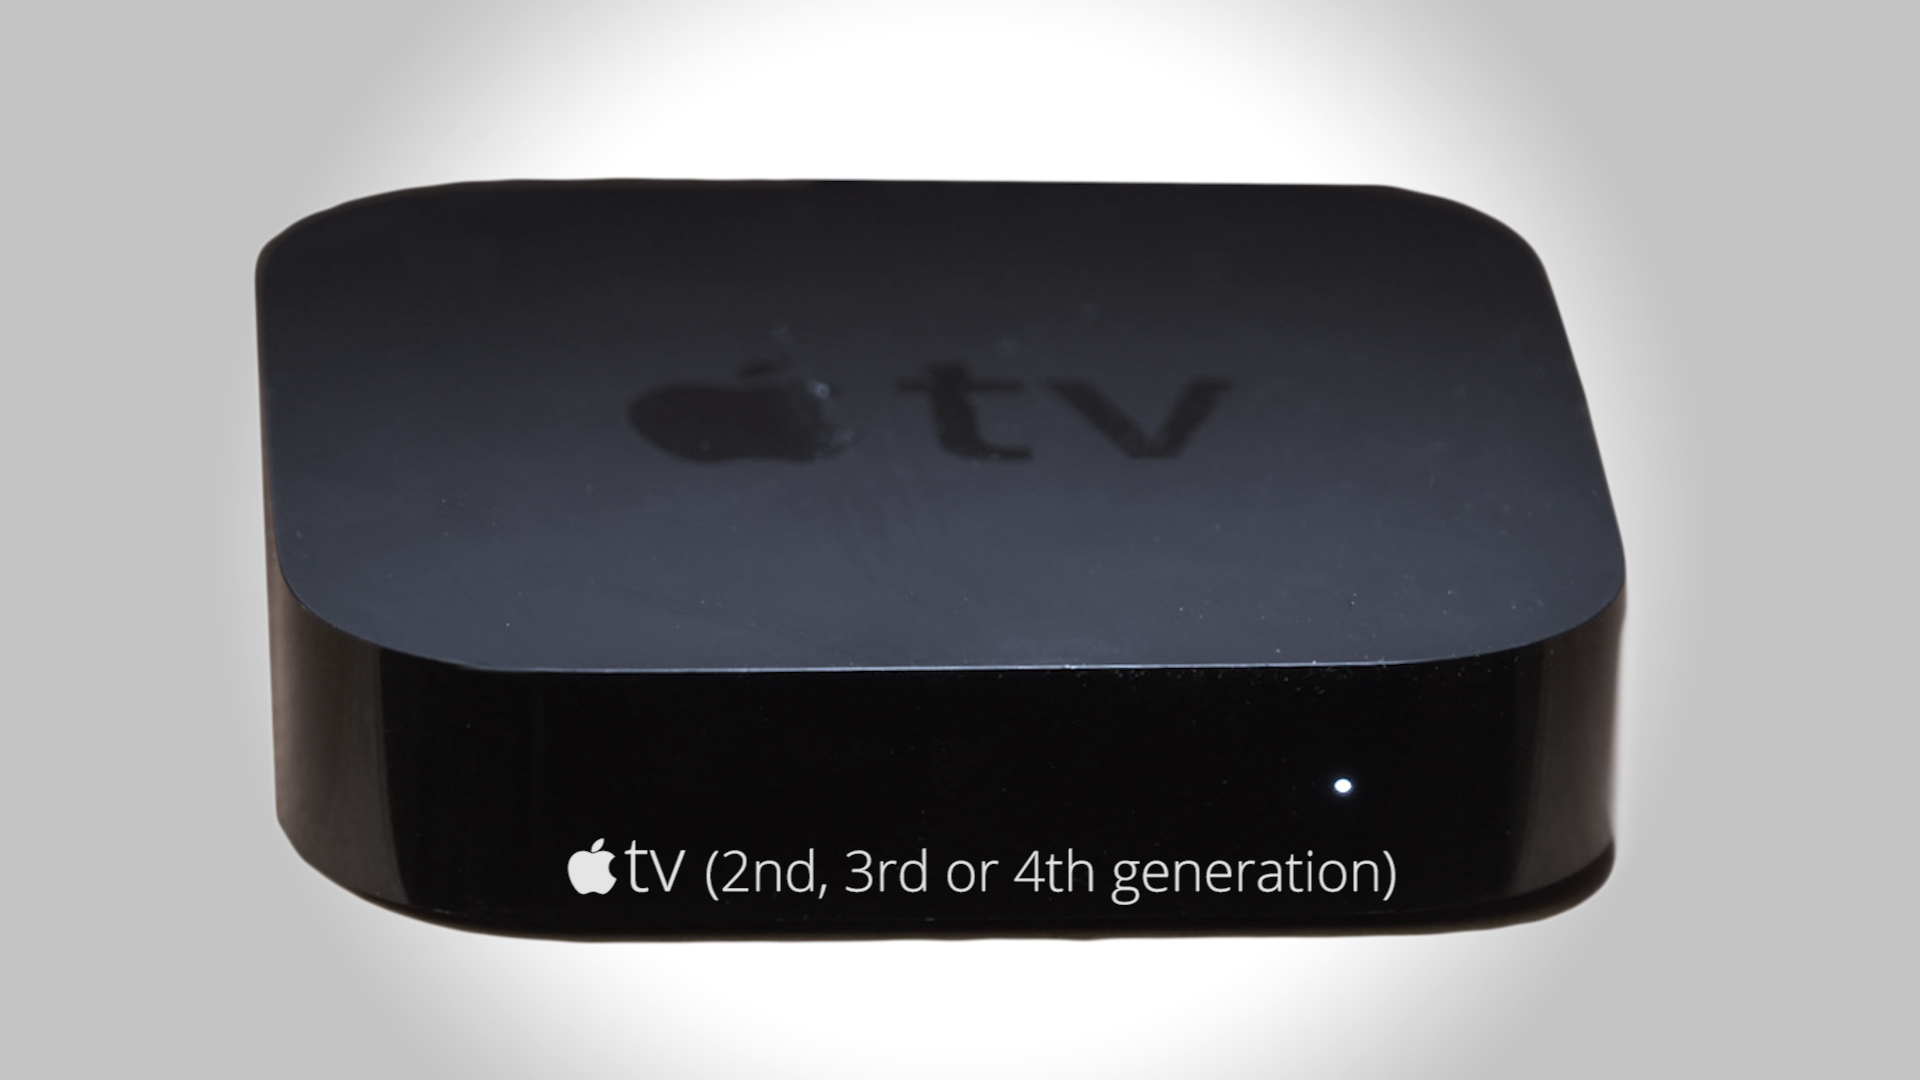 How to AirPlay to an Apple TV